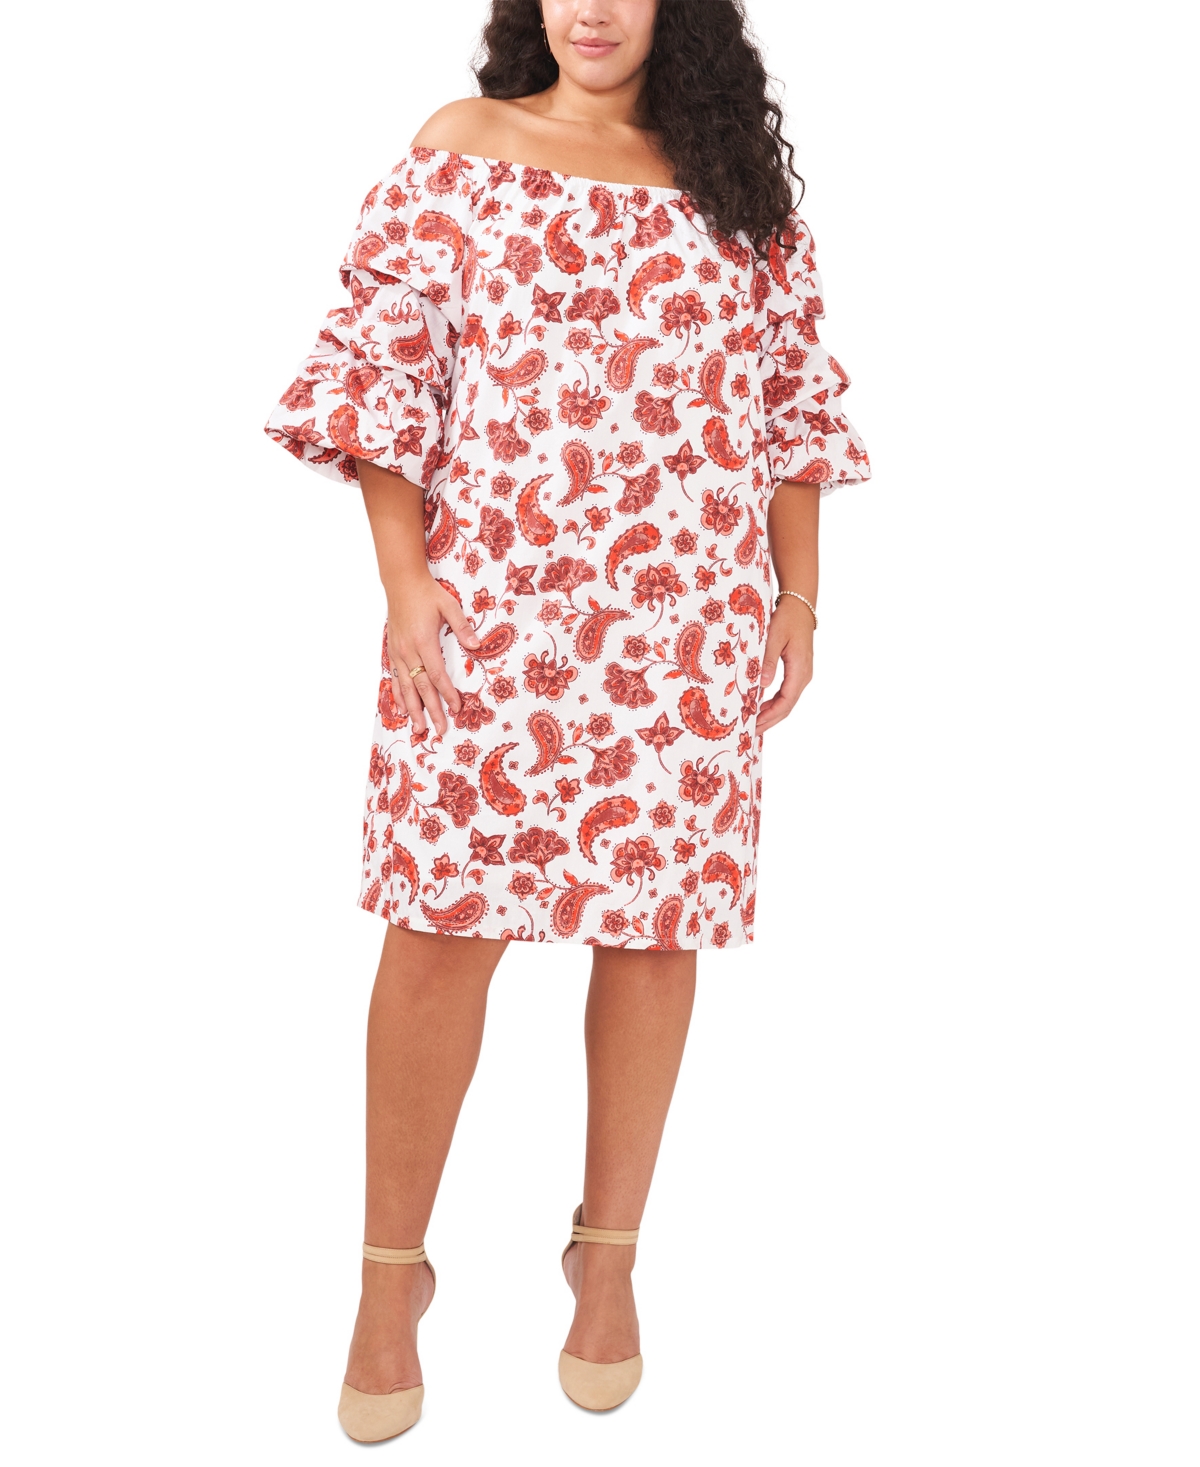 Plus Size Printed Off-The-Shoulder Dress - White/red